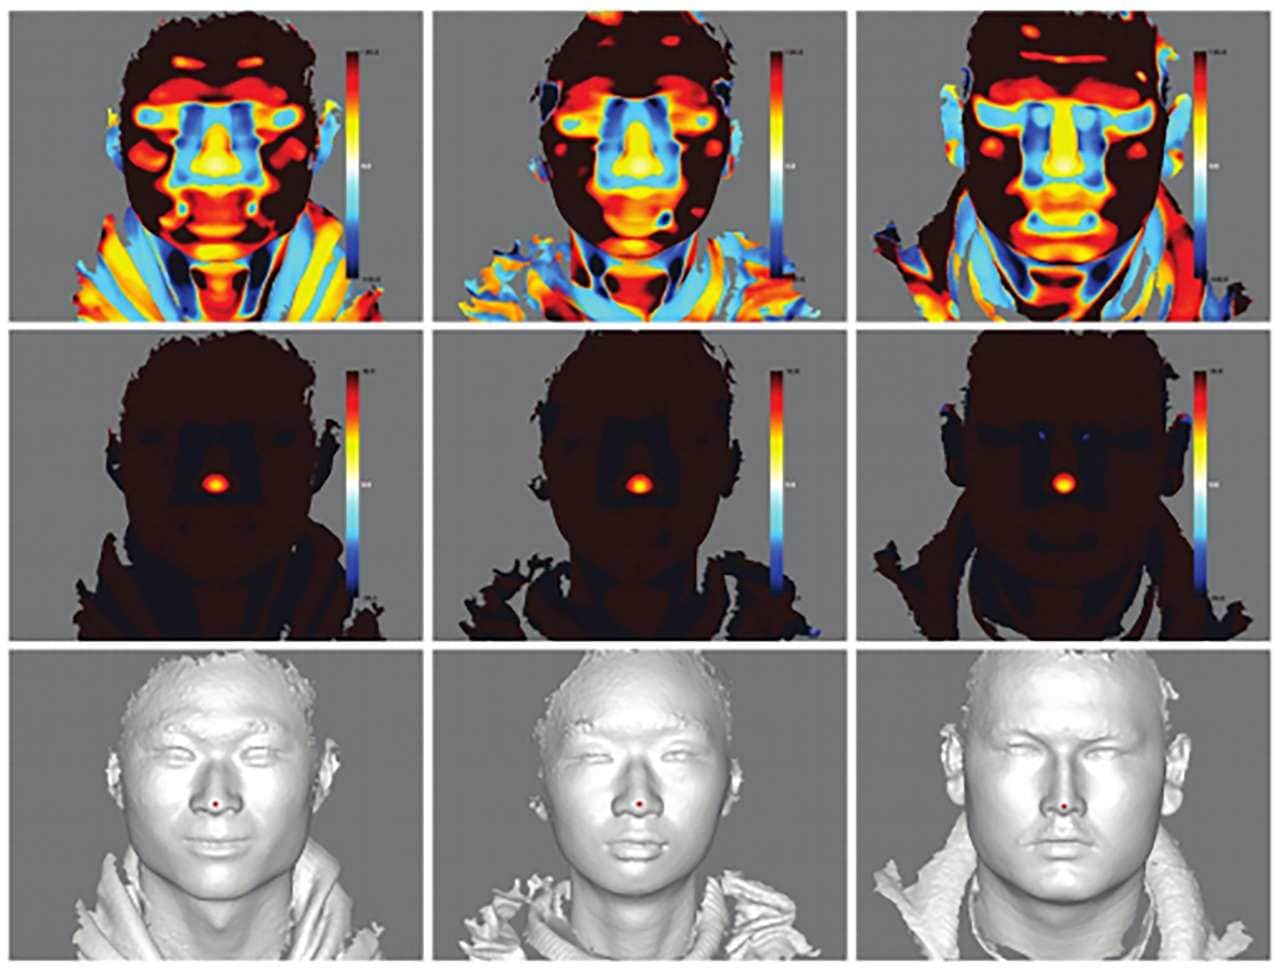 Images from a 2013 study on 3D human facial construction. China’s efforts to use DNA to create an image of a person’s face prompt worries among ethics experts as to how the tool could be used to justify racial profiling against Uighurs, a Muslim ethnic group. Image: BMC Bioinformatics/NYT